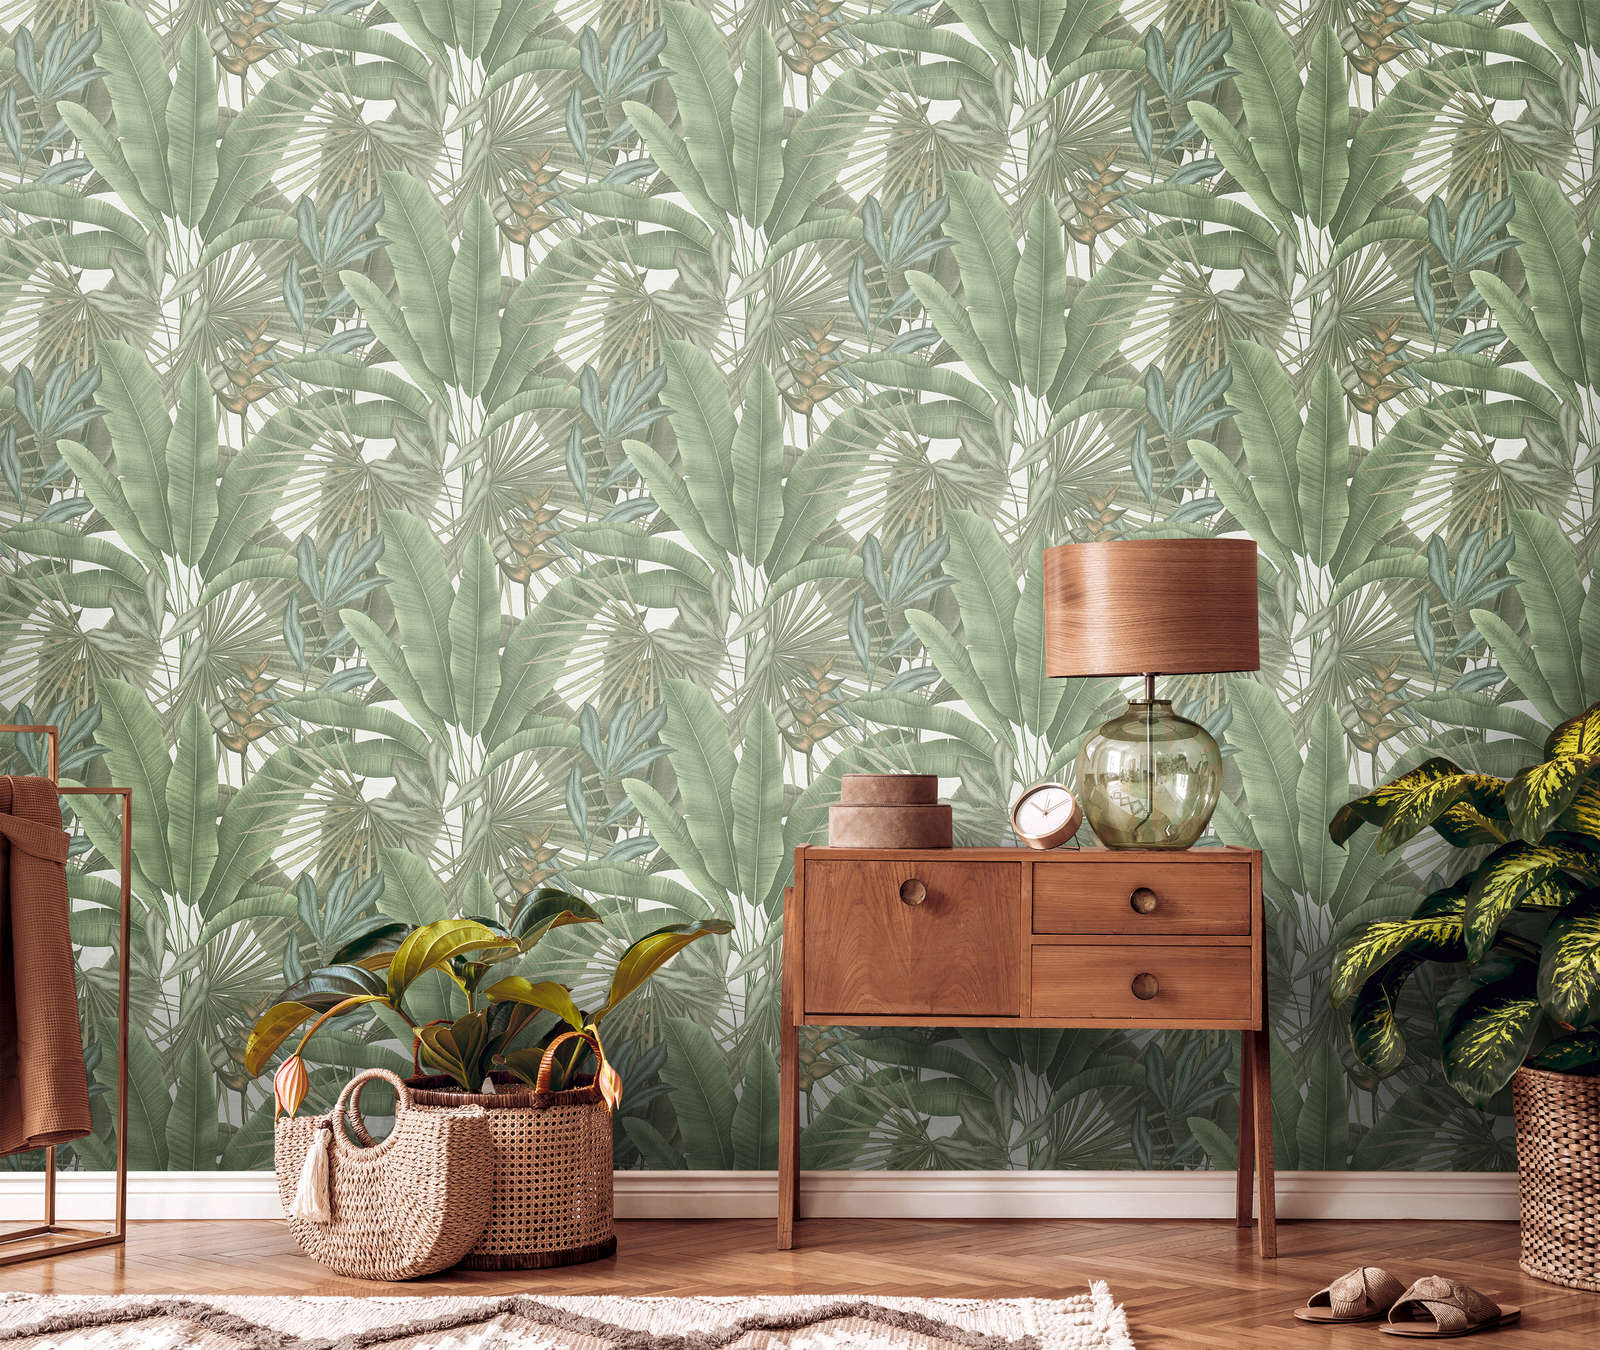             Lightly textured floral jungle wallpaper with large leaves - green, white, beige
        